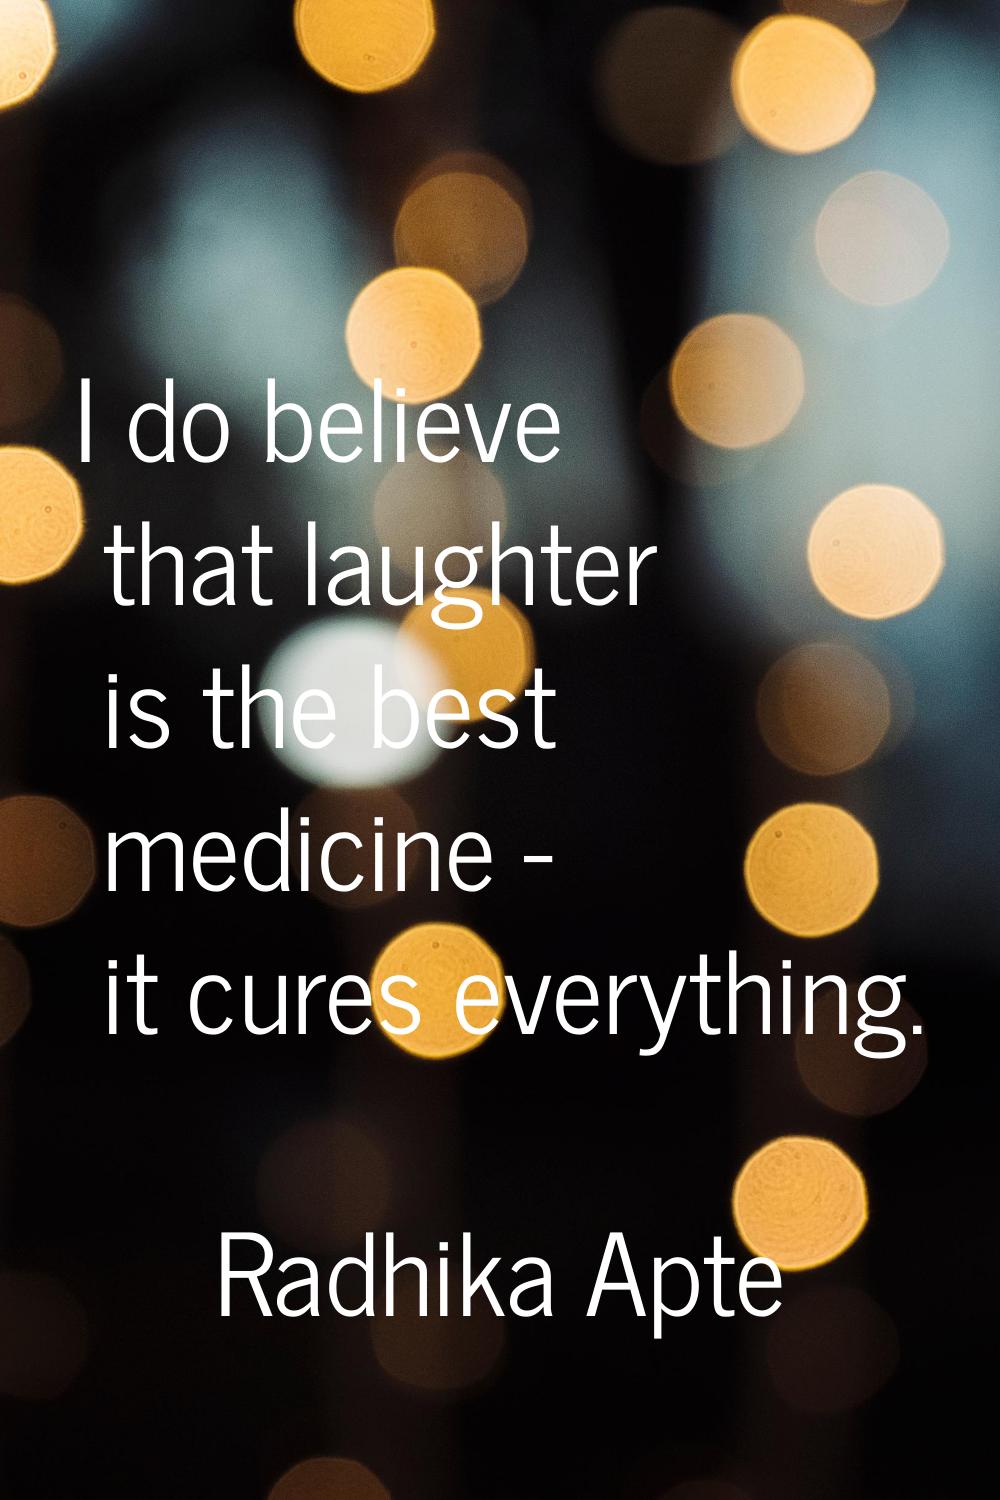 I do believe that laughter is the best medicine - it cures everything.